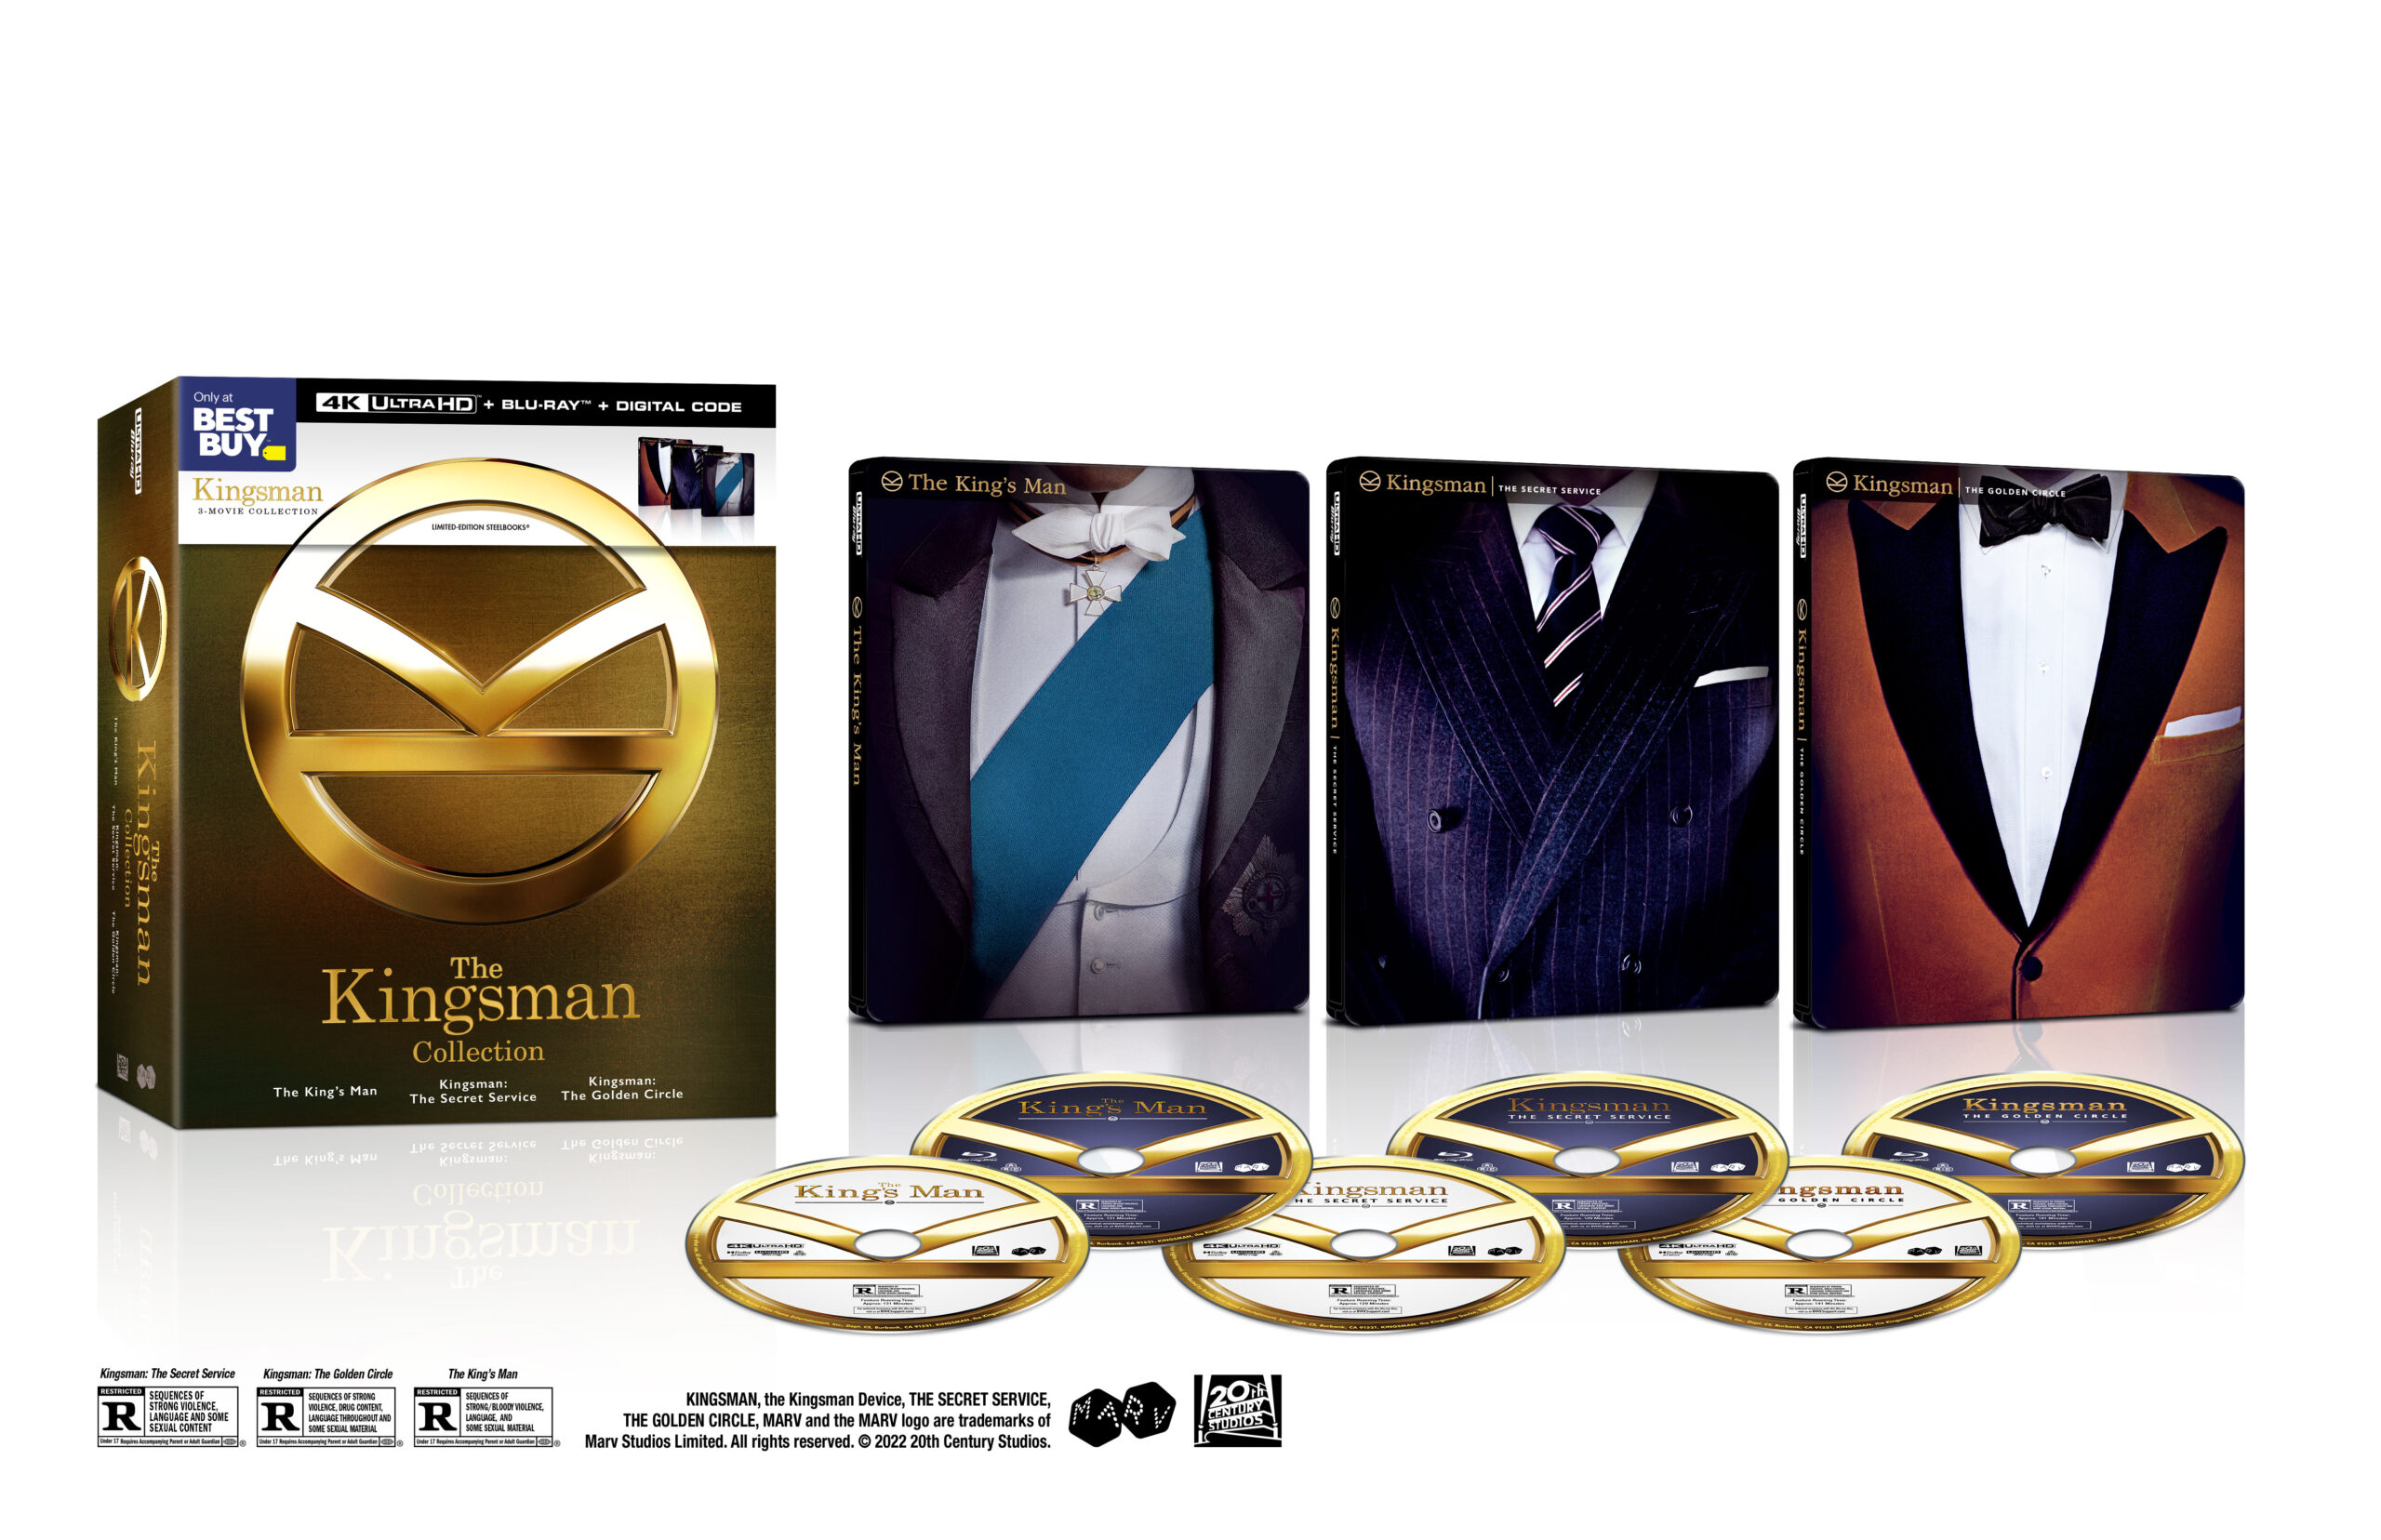 The Kingsman Steelbook Collection